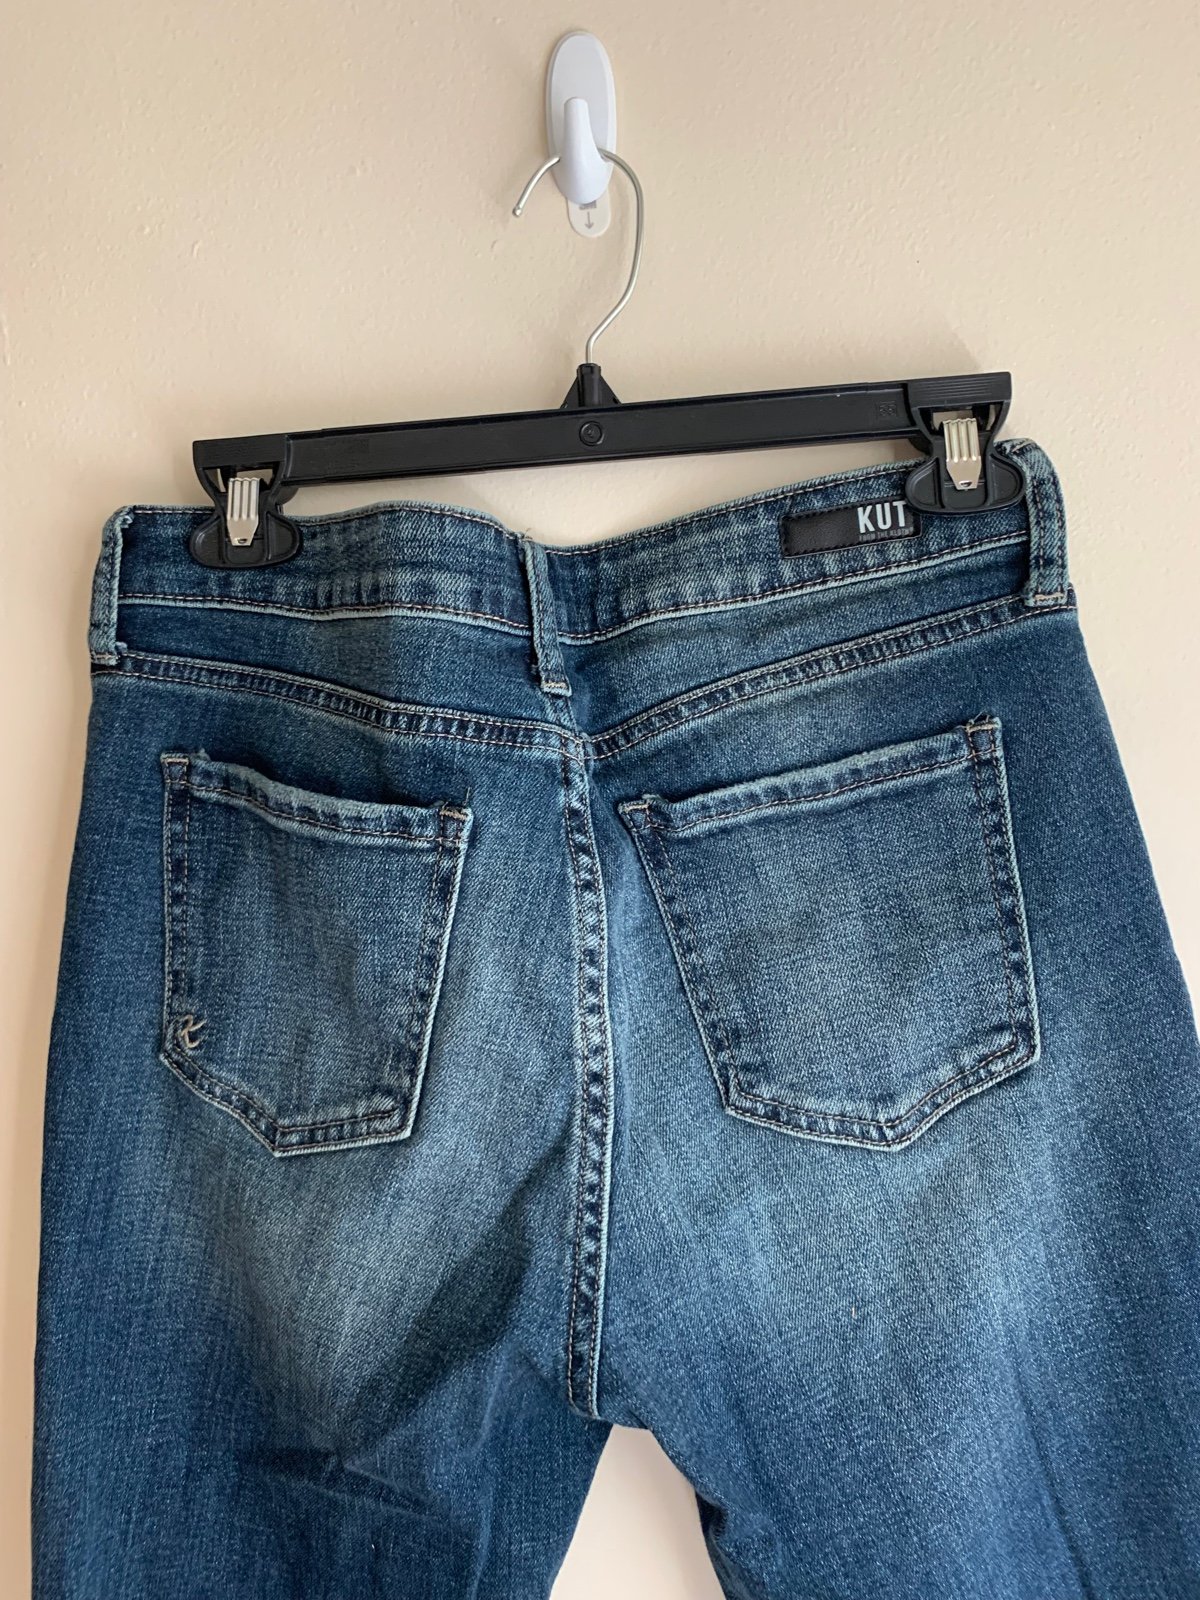 the Lowest price Kut from the kloth jeans size 8 je5hPd5vF Novel 